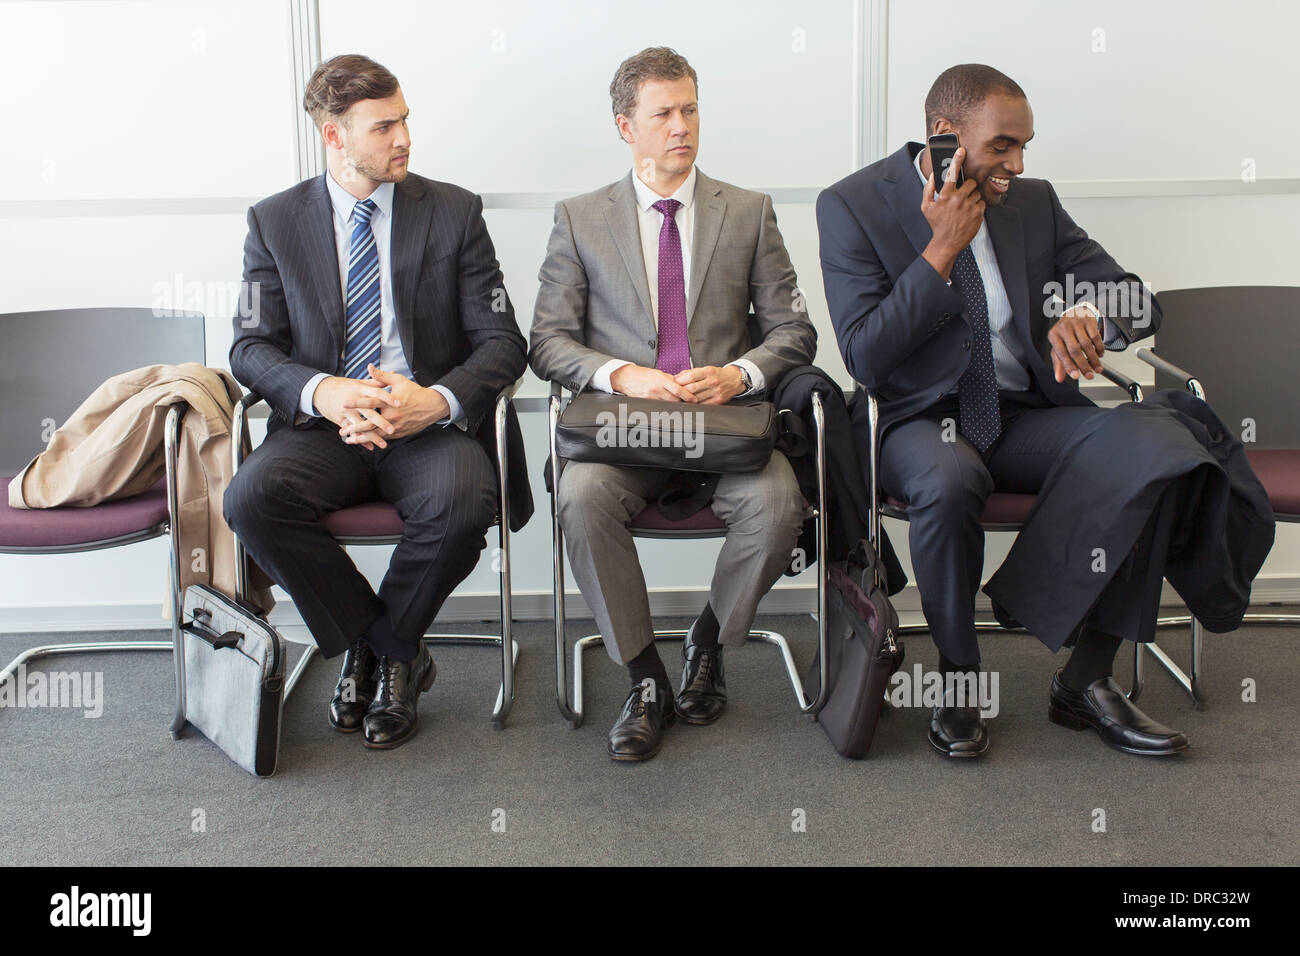 Businessmen sitting in waiting area Stock Photo